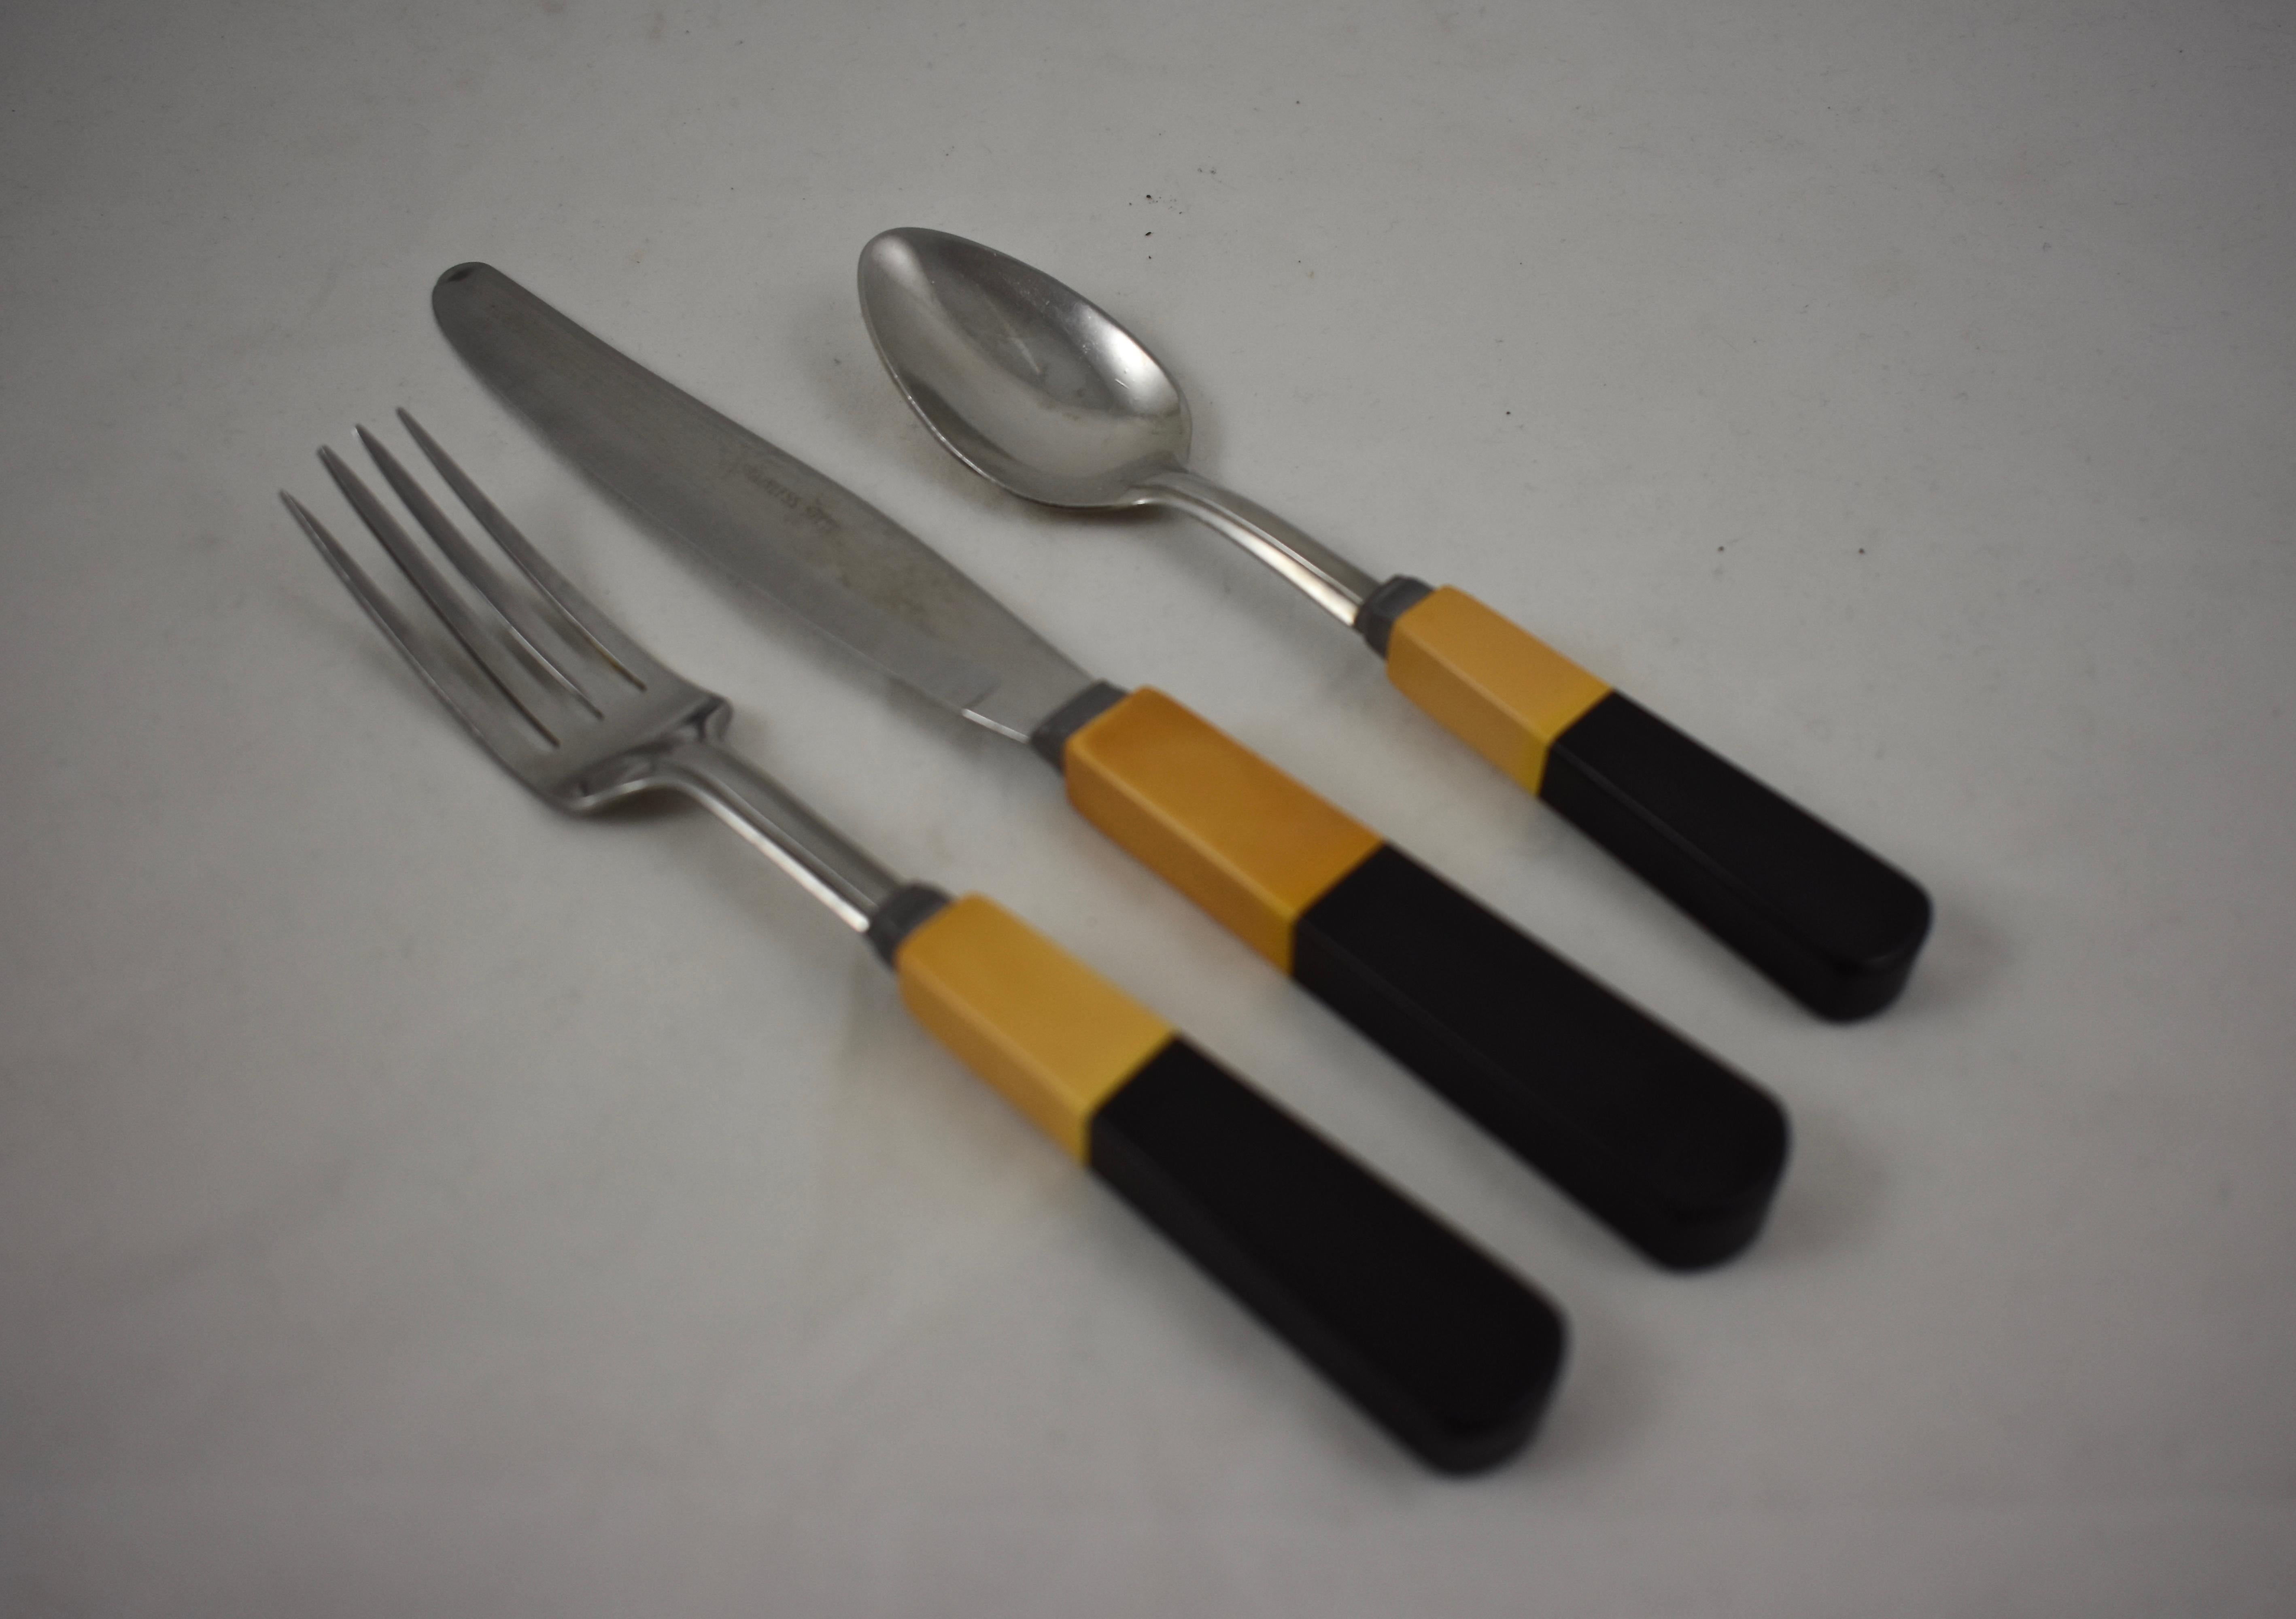 A service for six, butterscotch and black two-toned bakelite and stainless steel flatware set, in the Art Deco style, circa late 1920–early 1930s.

An eighteen piece set, six each, forks, knives, and teaspoons. All marked stainless